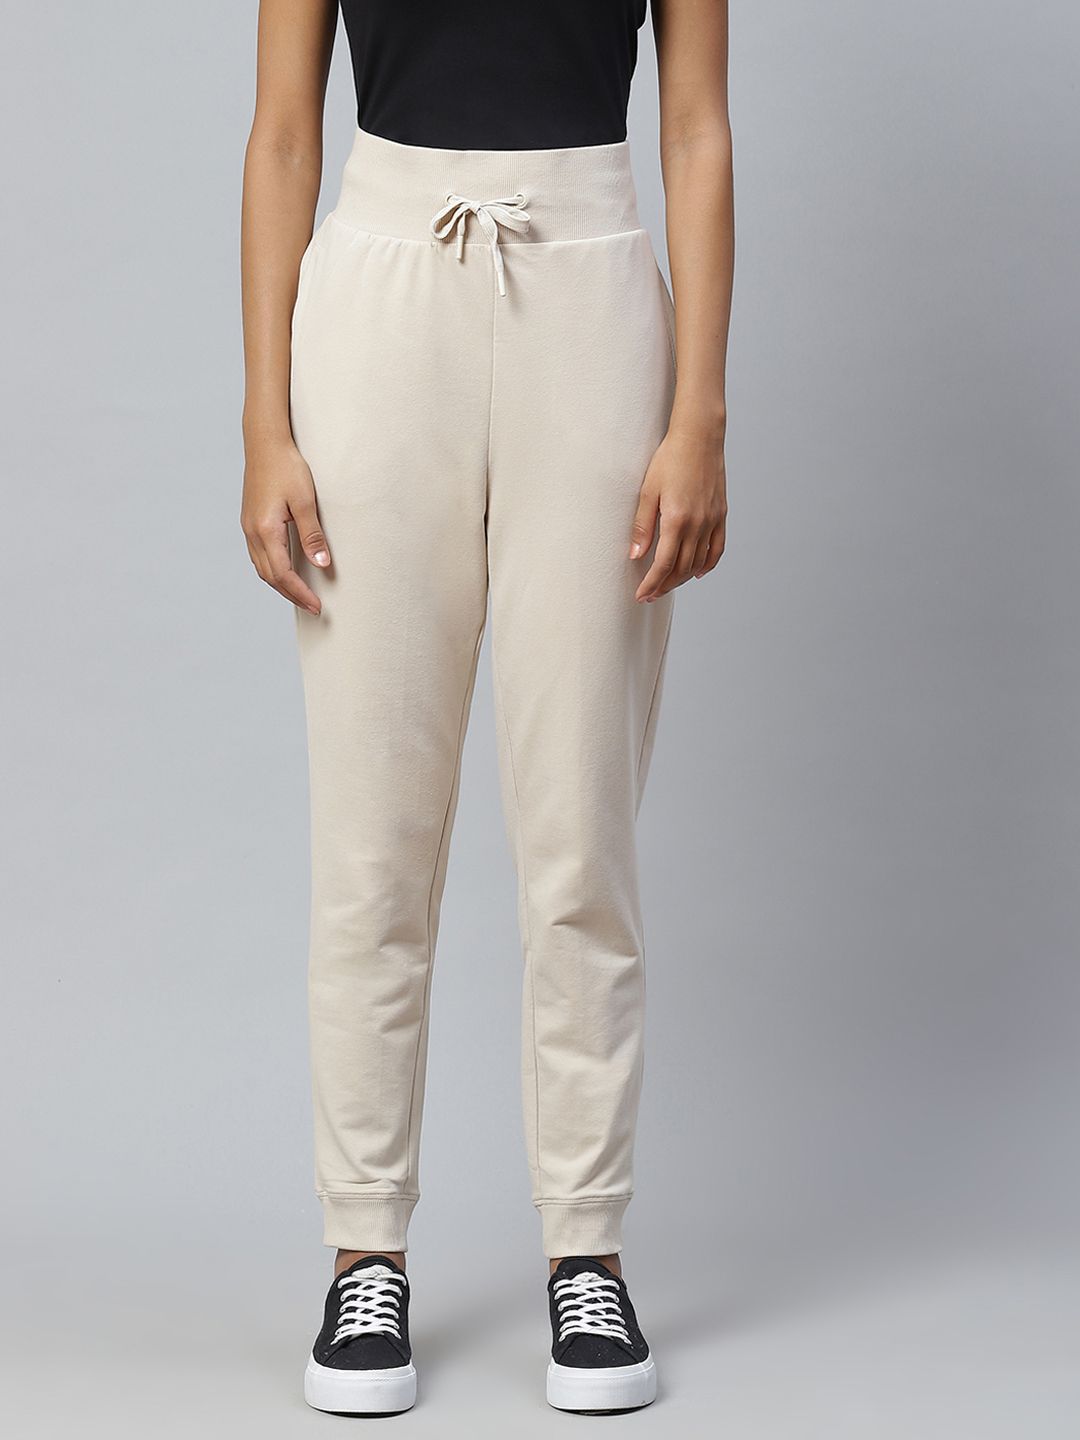 Marks & Spencer Women Beige High-Rise Sports Joggers Price in India